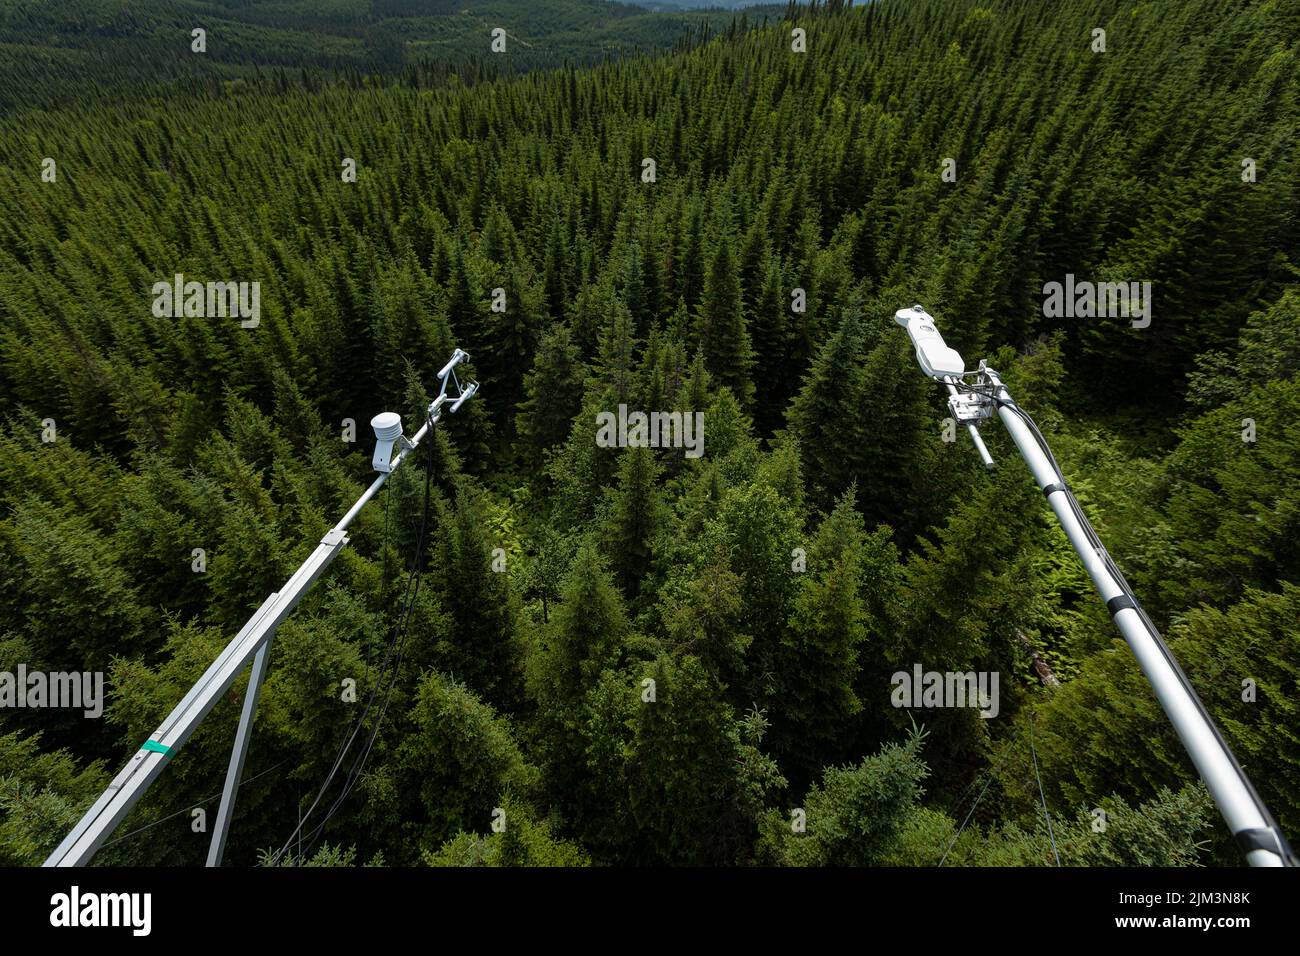 Scientific instruments are seen attached to the Flux tower of the Montmorency Forest Wednesday July 13, 2022. Located North of Quebec City Montmorency Stock Photo